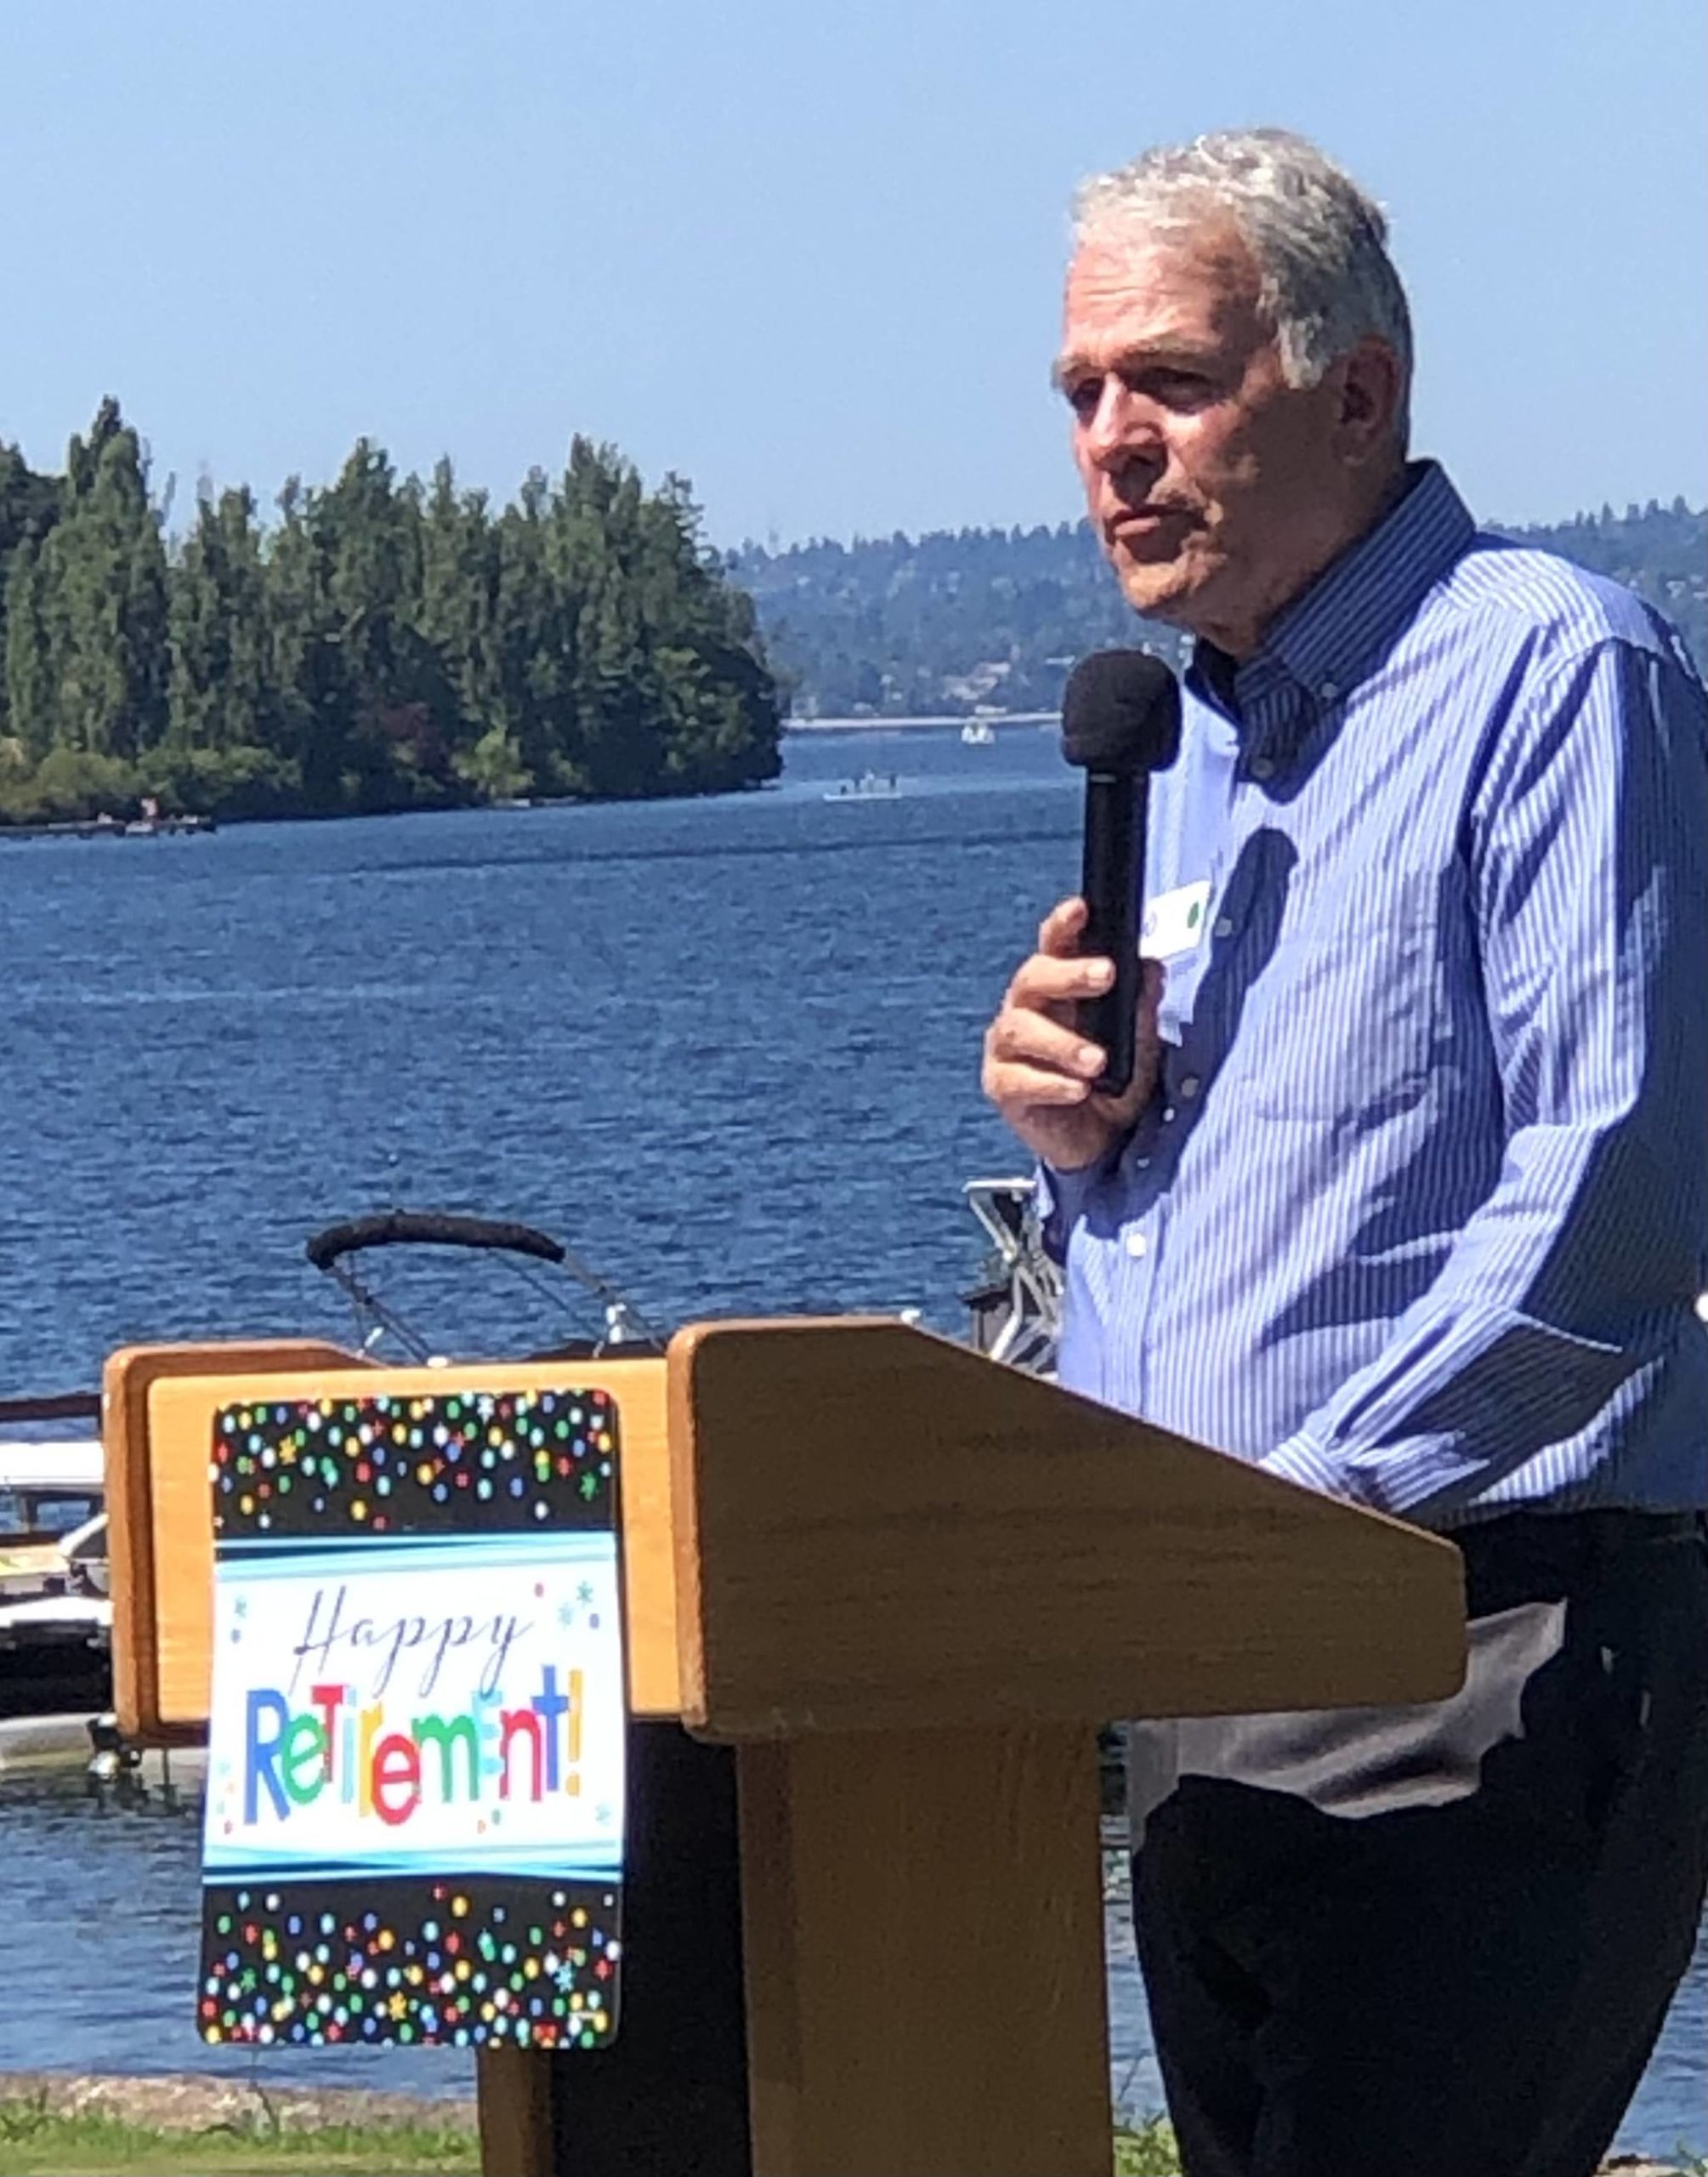 Bob Howell, who has been executive director of Mercer Island’s Covenant Living at the Shores since 2017, retired on July 29. Howell led the dedicated staff and close-knit residents as they persevered during the pandemic. Dan Scansen has been appointed as the new executive director at the faith-based, not-for-profit, senior living community. Photo courtesy of Greg Asimakoupoulos